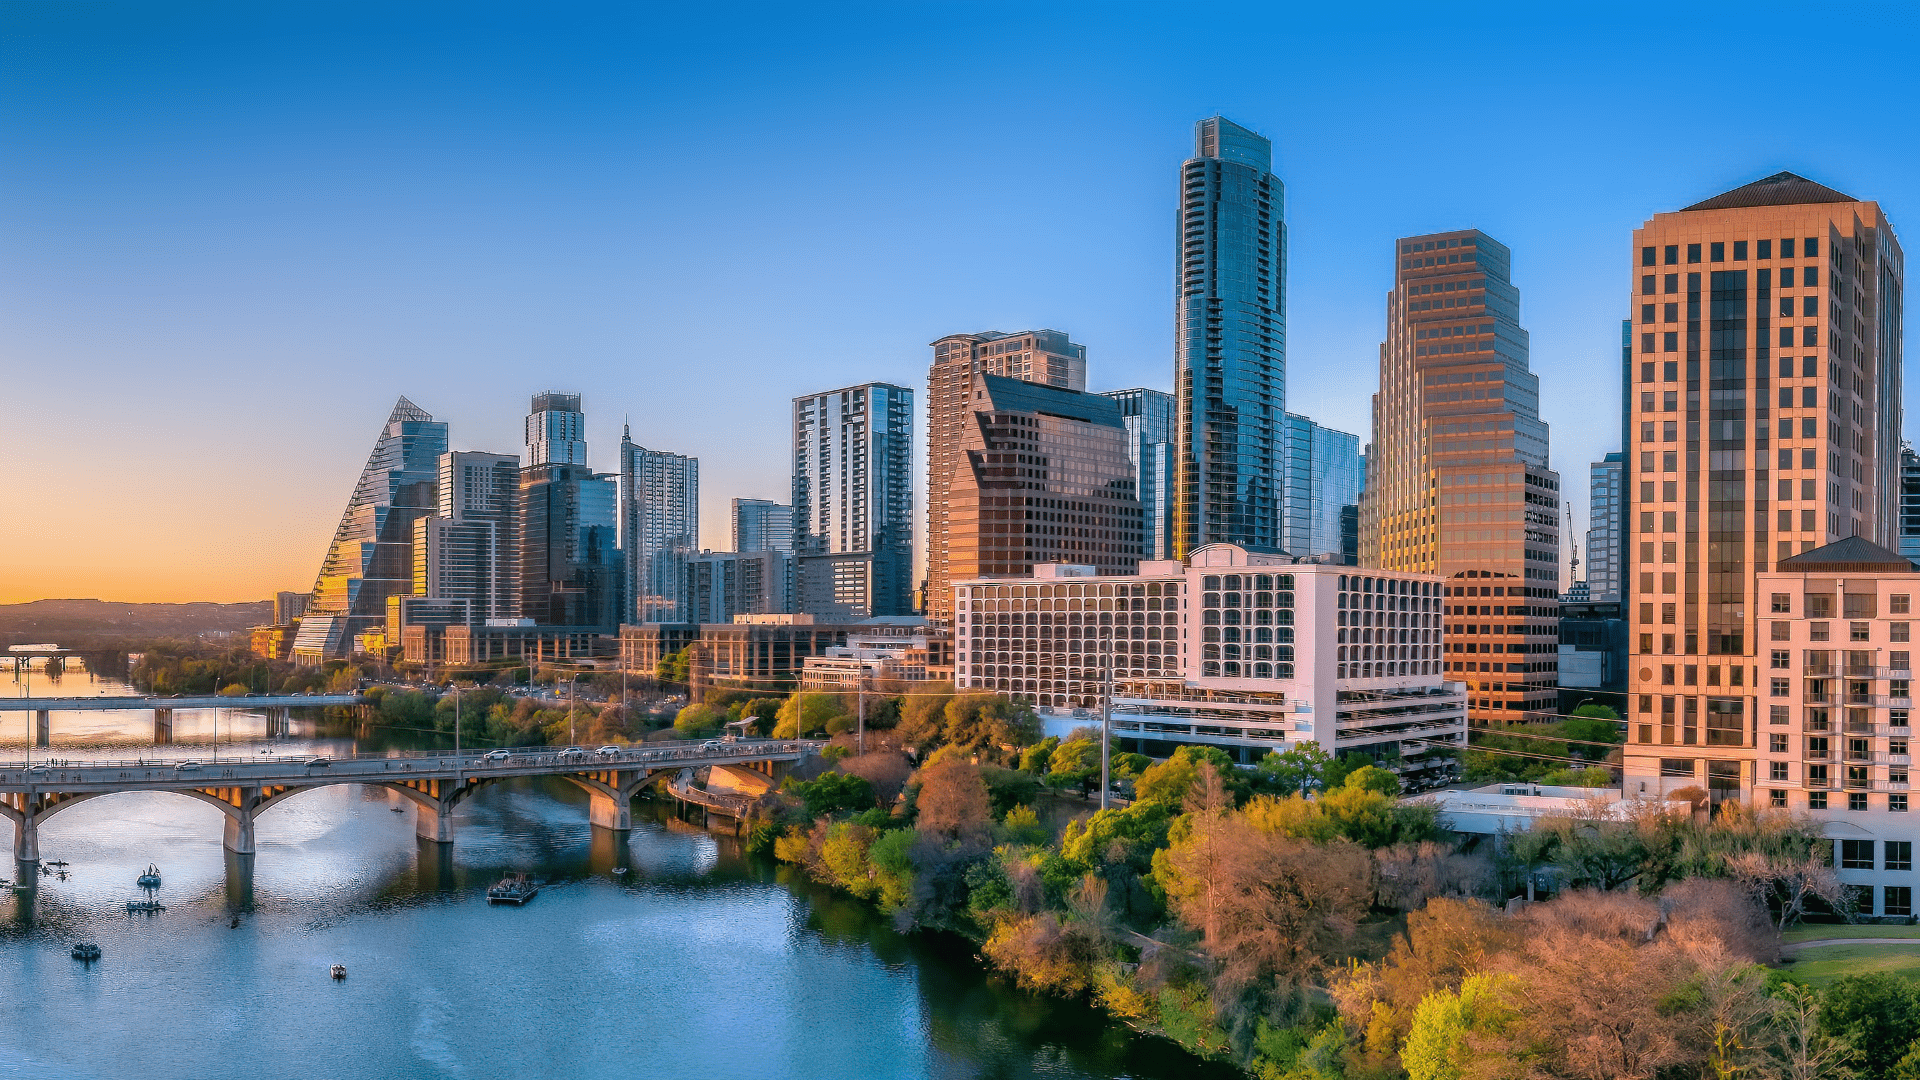 https://streamrealty.com/wp-content/uploads/2022/11/Location-Featured-Image-1920x1080-Austin-1.png